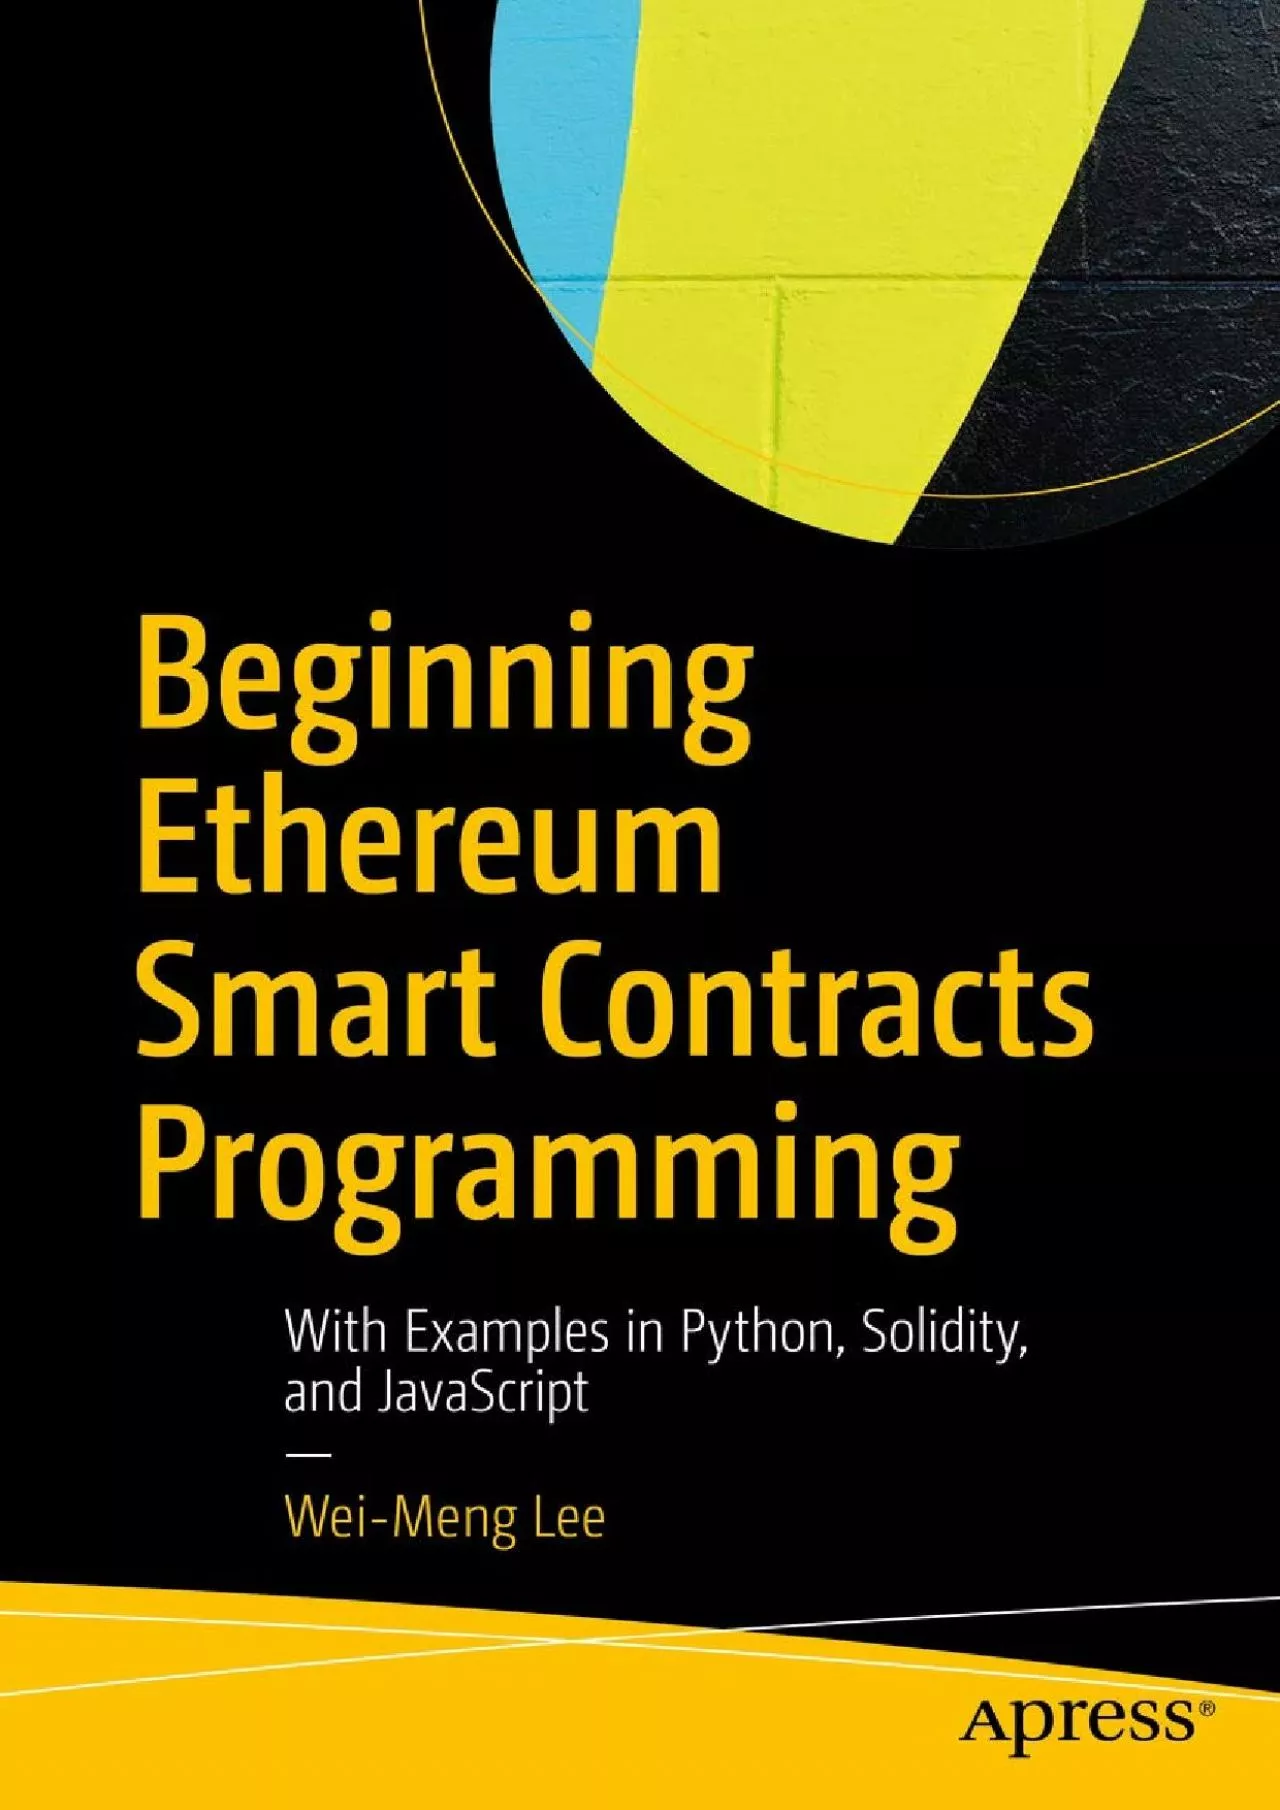 [FREE]-Beginning Ethereum Smart Contracts Programming: With Examples in Python, Solidity,